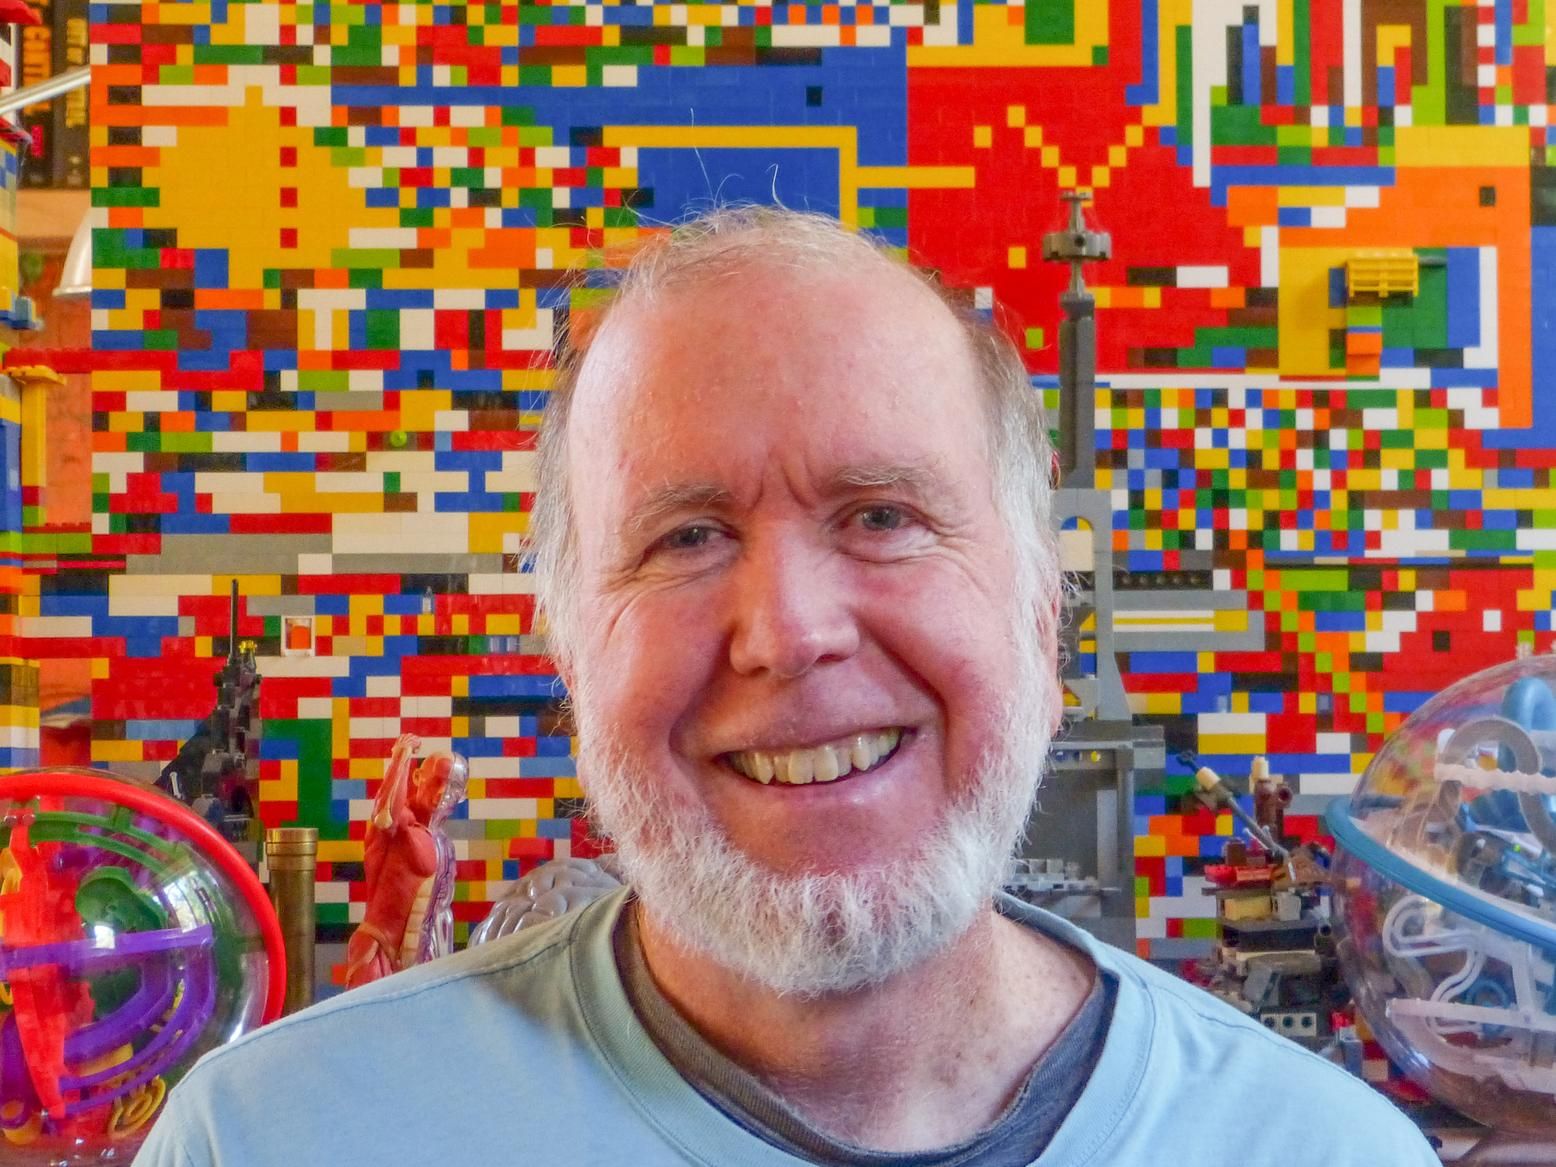 em>Wired</em> Founder Kevin Kelly On the Technologies That Will